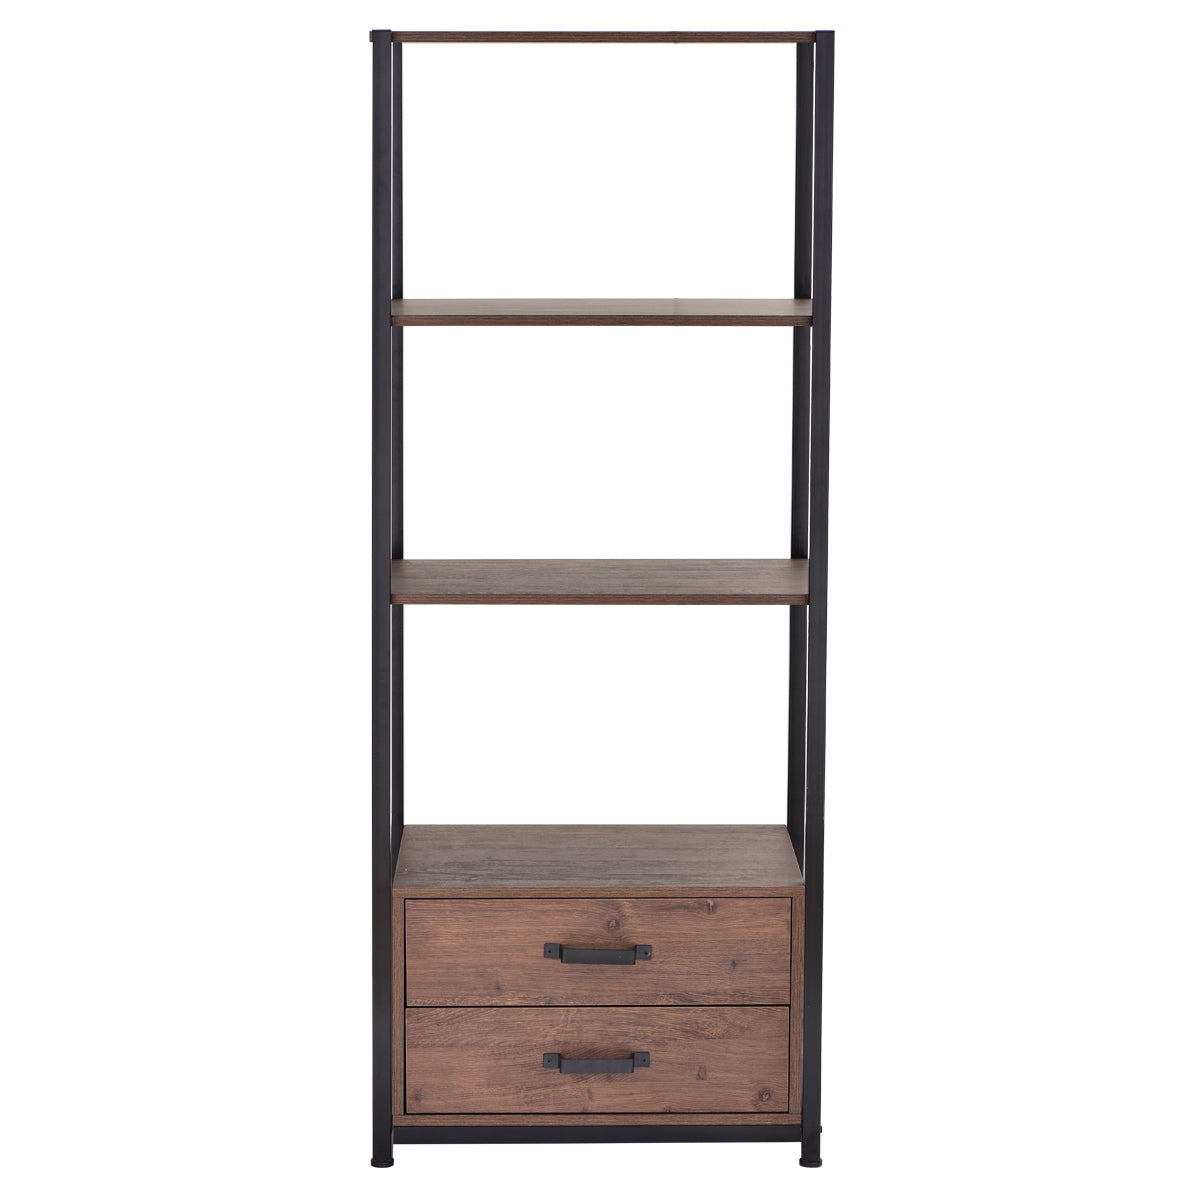 4-Tier Bookshelf Industrial Bookcase with 4 Open Storage Shelves and Two Drawers